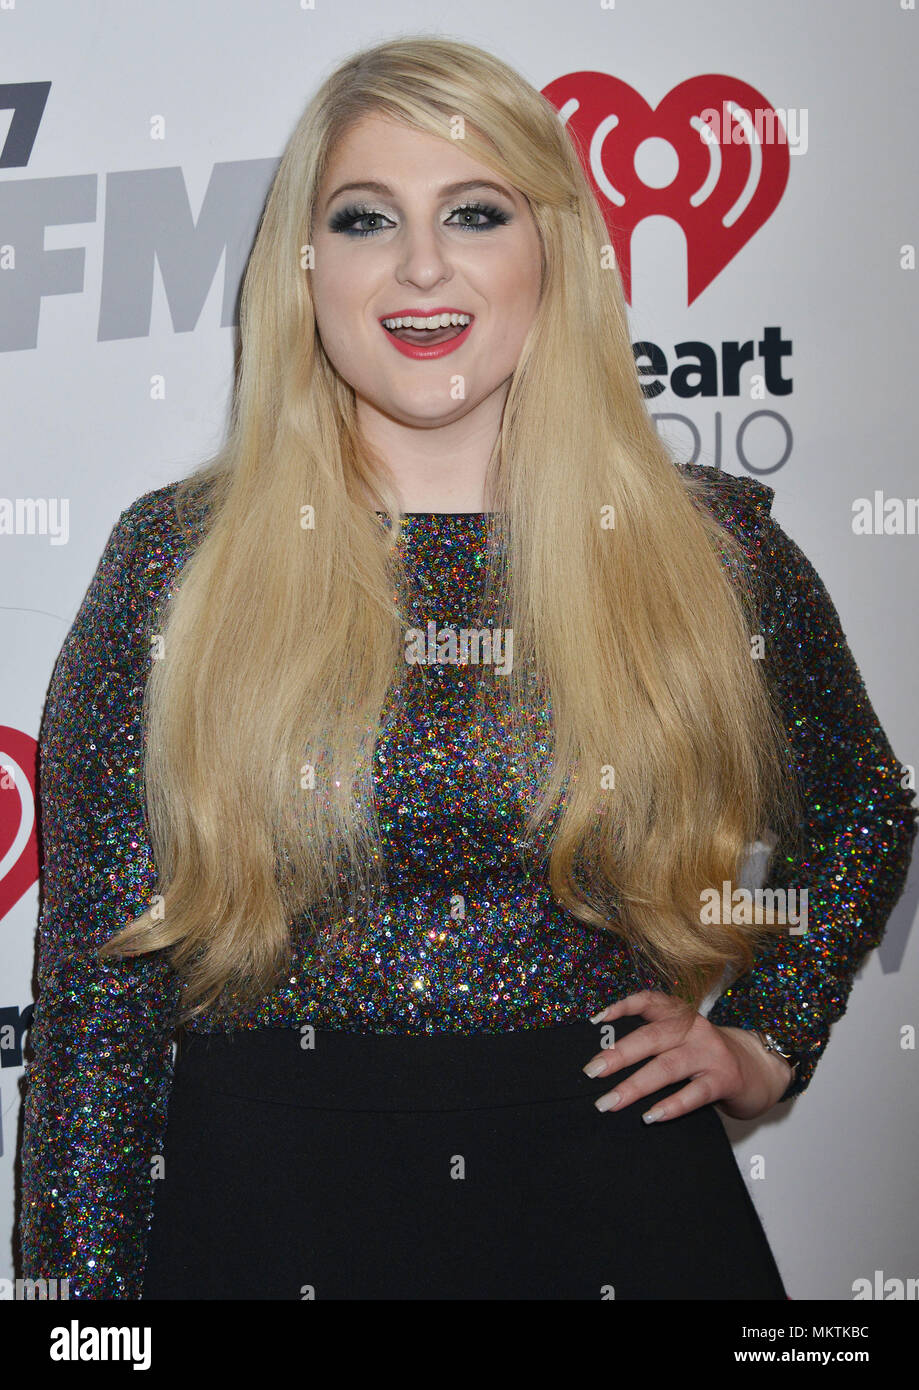 LOS ANGELES, NOV 23 - Meghan Trainor at the 2014 American Music Awards,  Arrivals at the Nokia Theater on November 23, 2014 in Los Angeles, CA  10096783 Stock Photo at Vecteezy